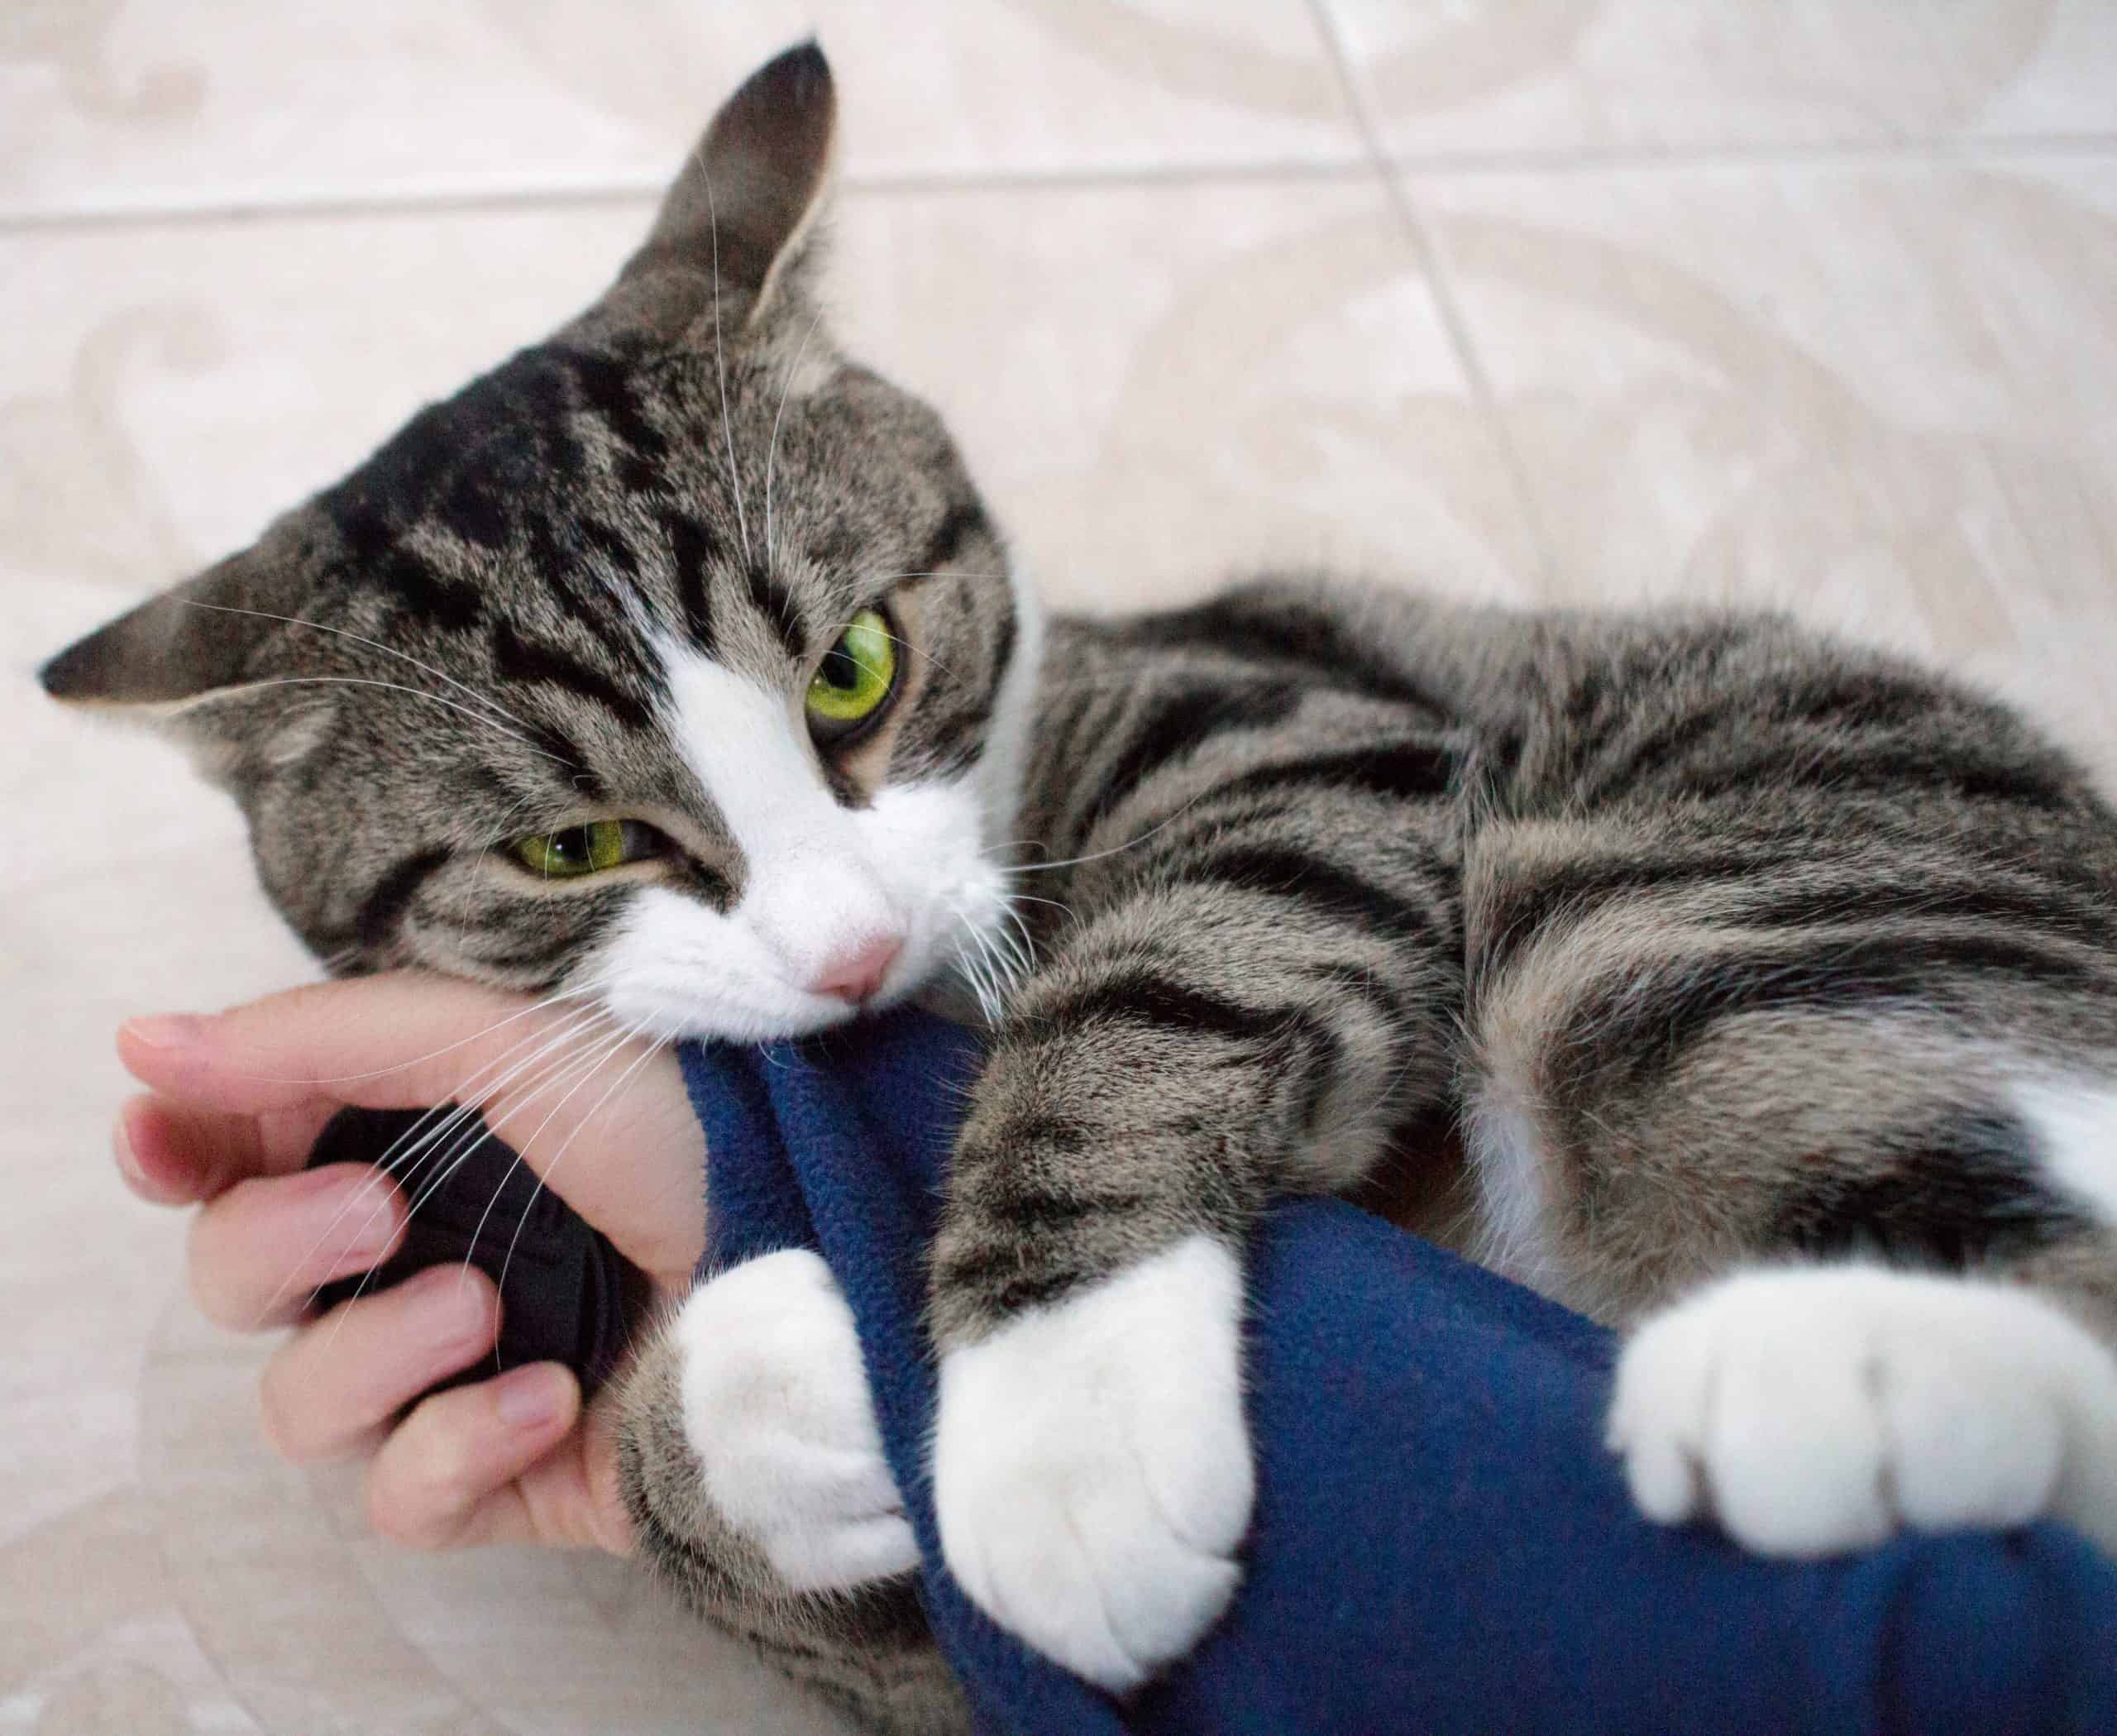 Domestic pet cat with bright green eyes plays biting arm sleeve